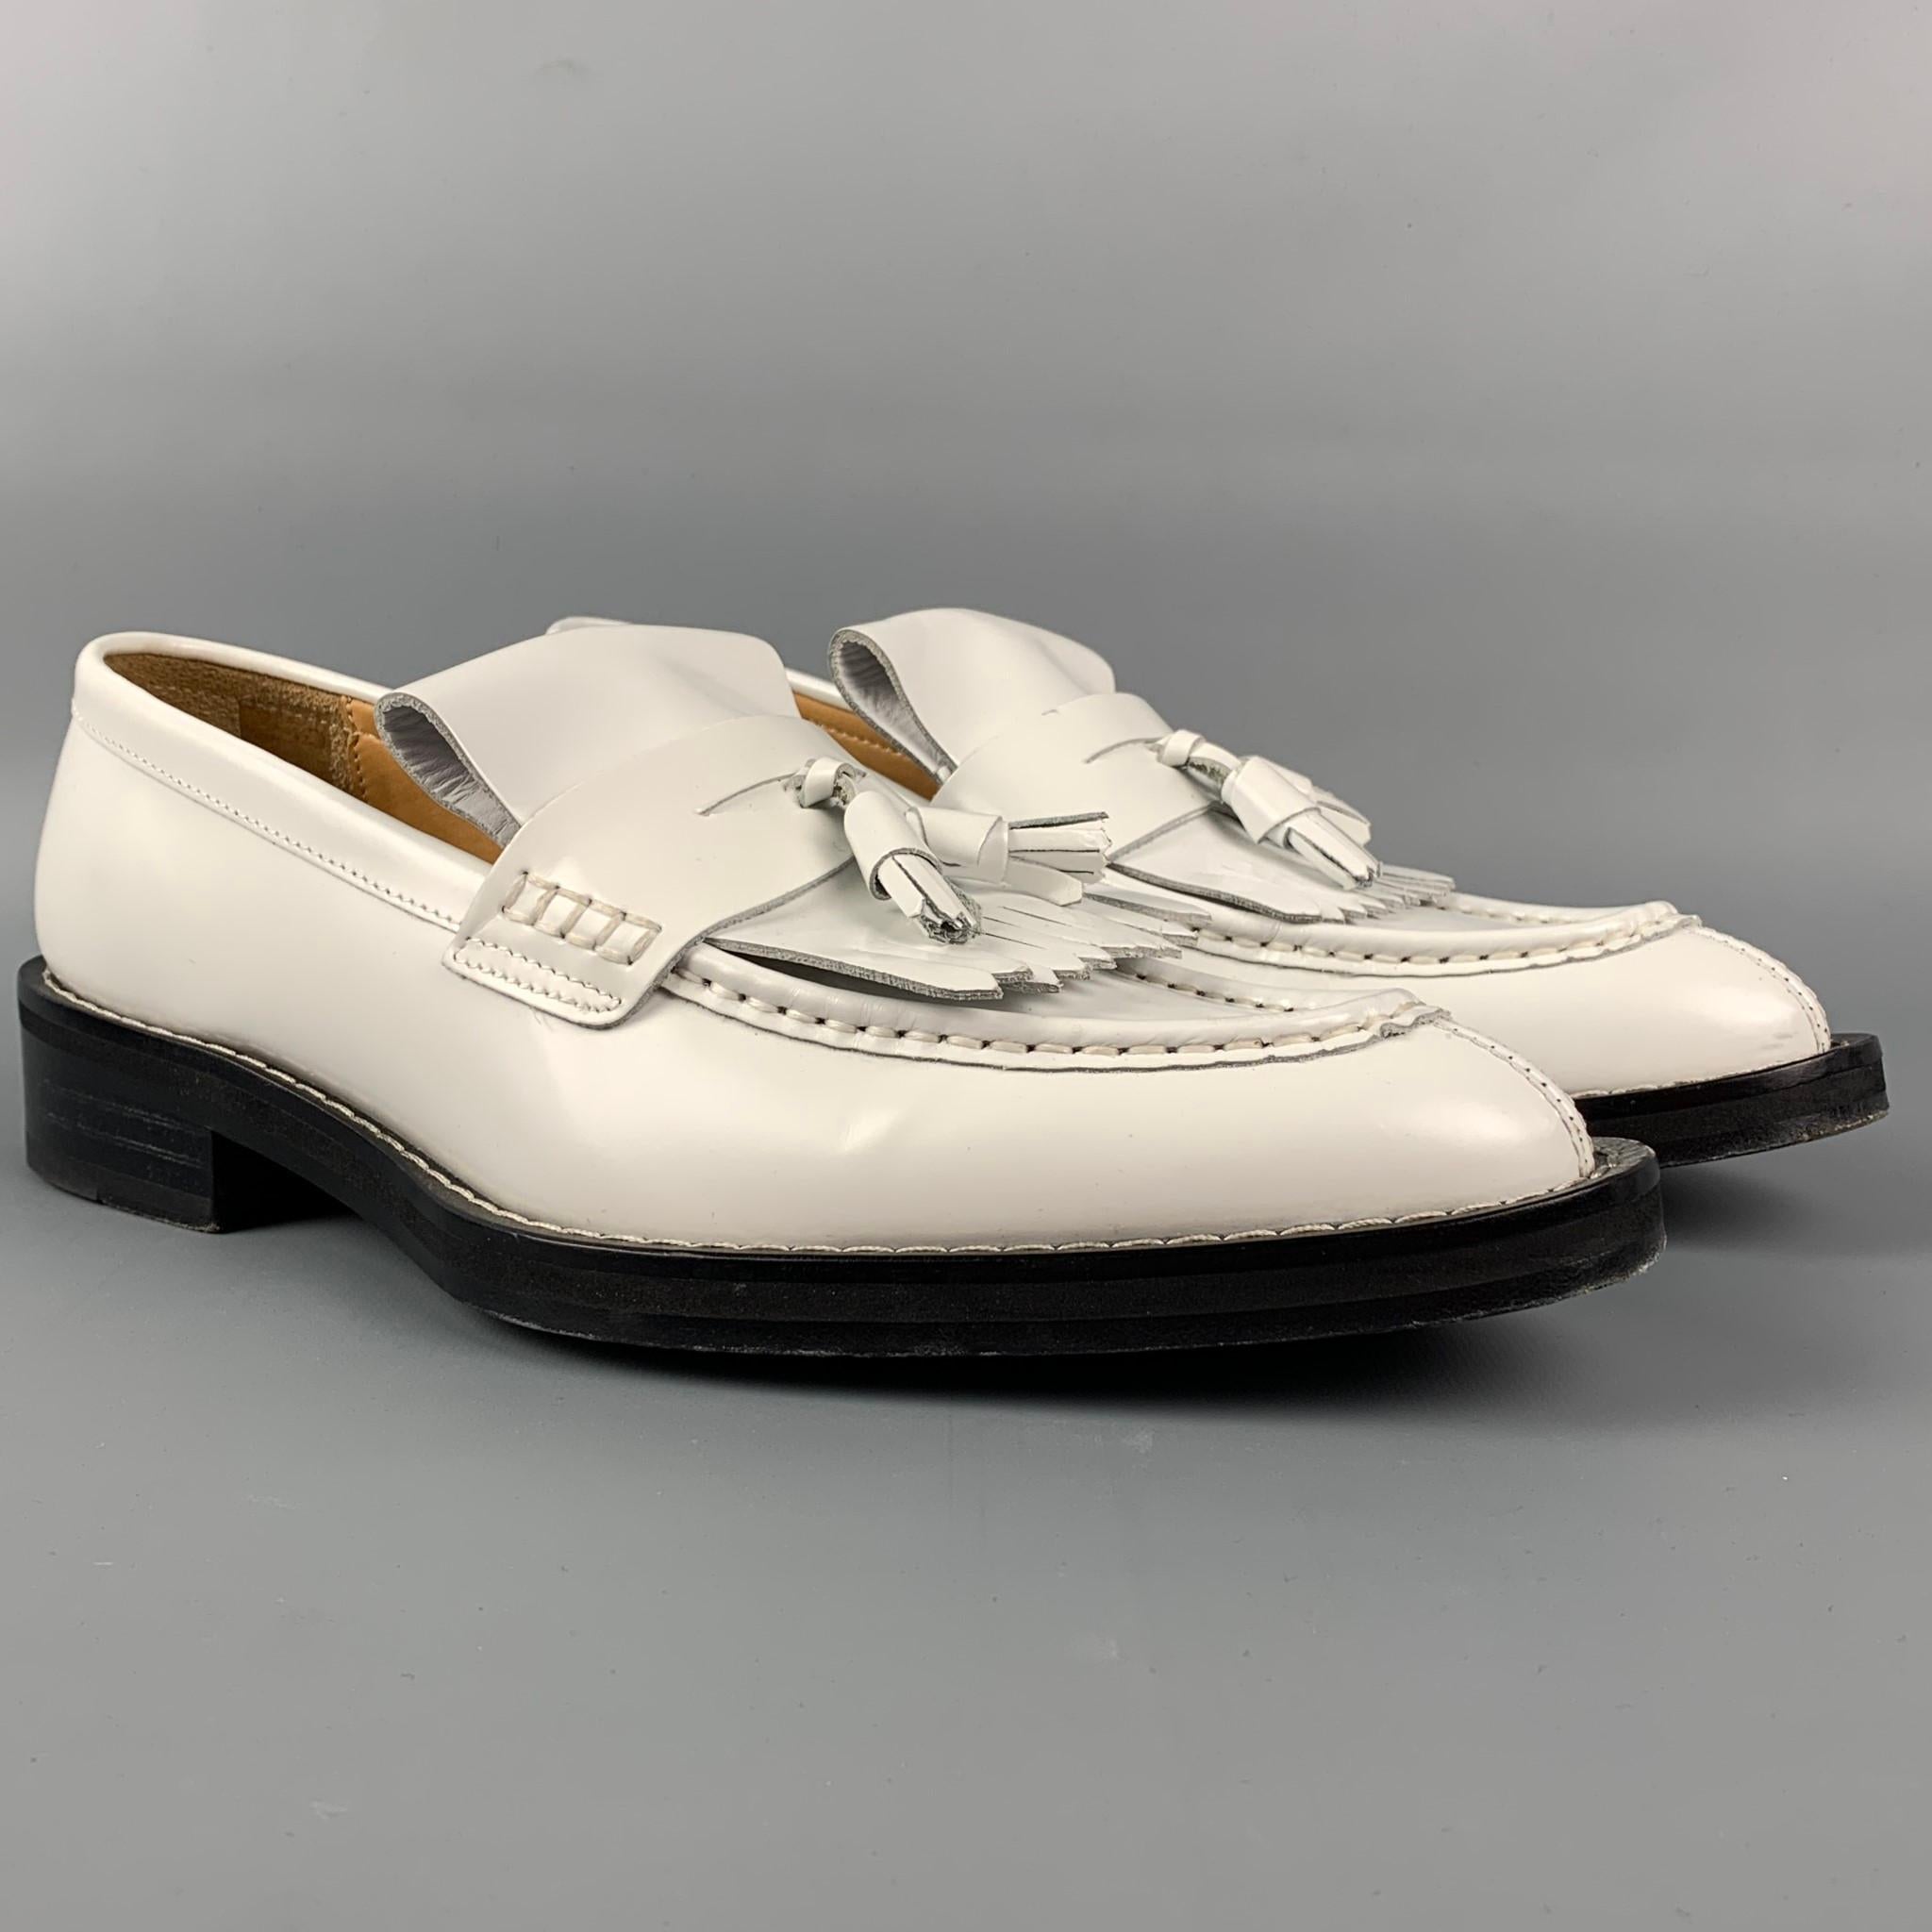 AMI by ALEXANDRE MATTIUSSI loafers comes in a white leather featuring a tassel design, fringe trim, almond moc toe, and a stacked leather heel. Includes box. Made in Portugal.

Very Good Pre-Owned Condition.
Marked: 42 / H19S101 901

Outsole: 12.5